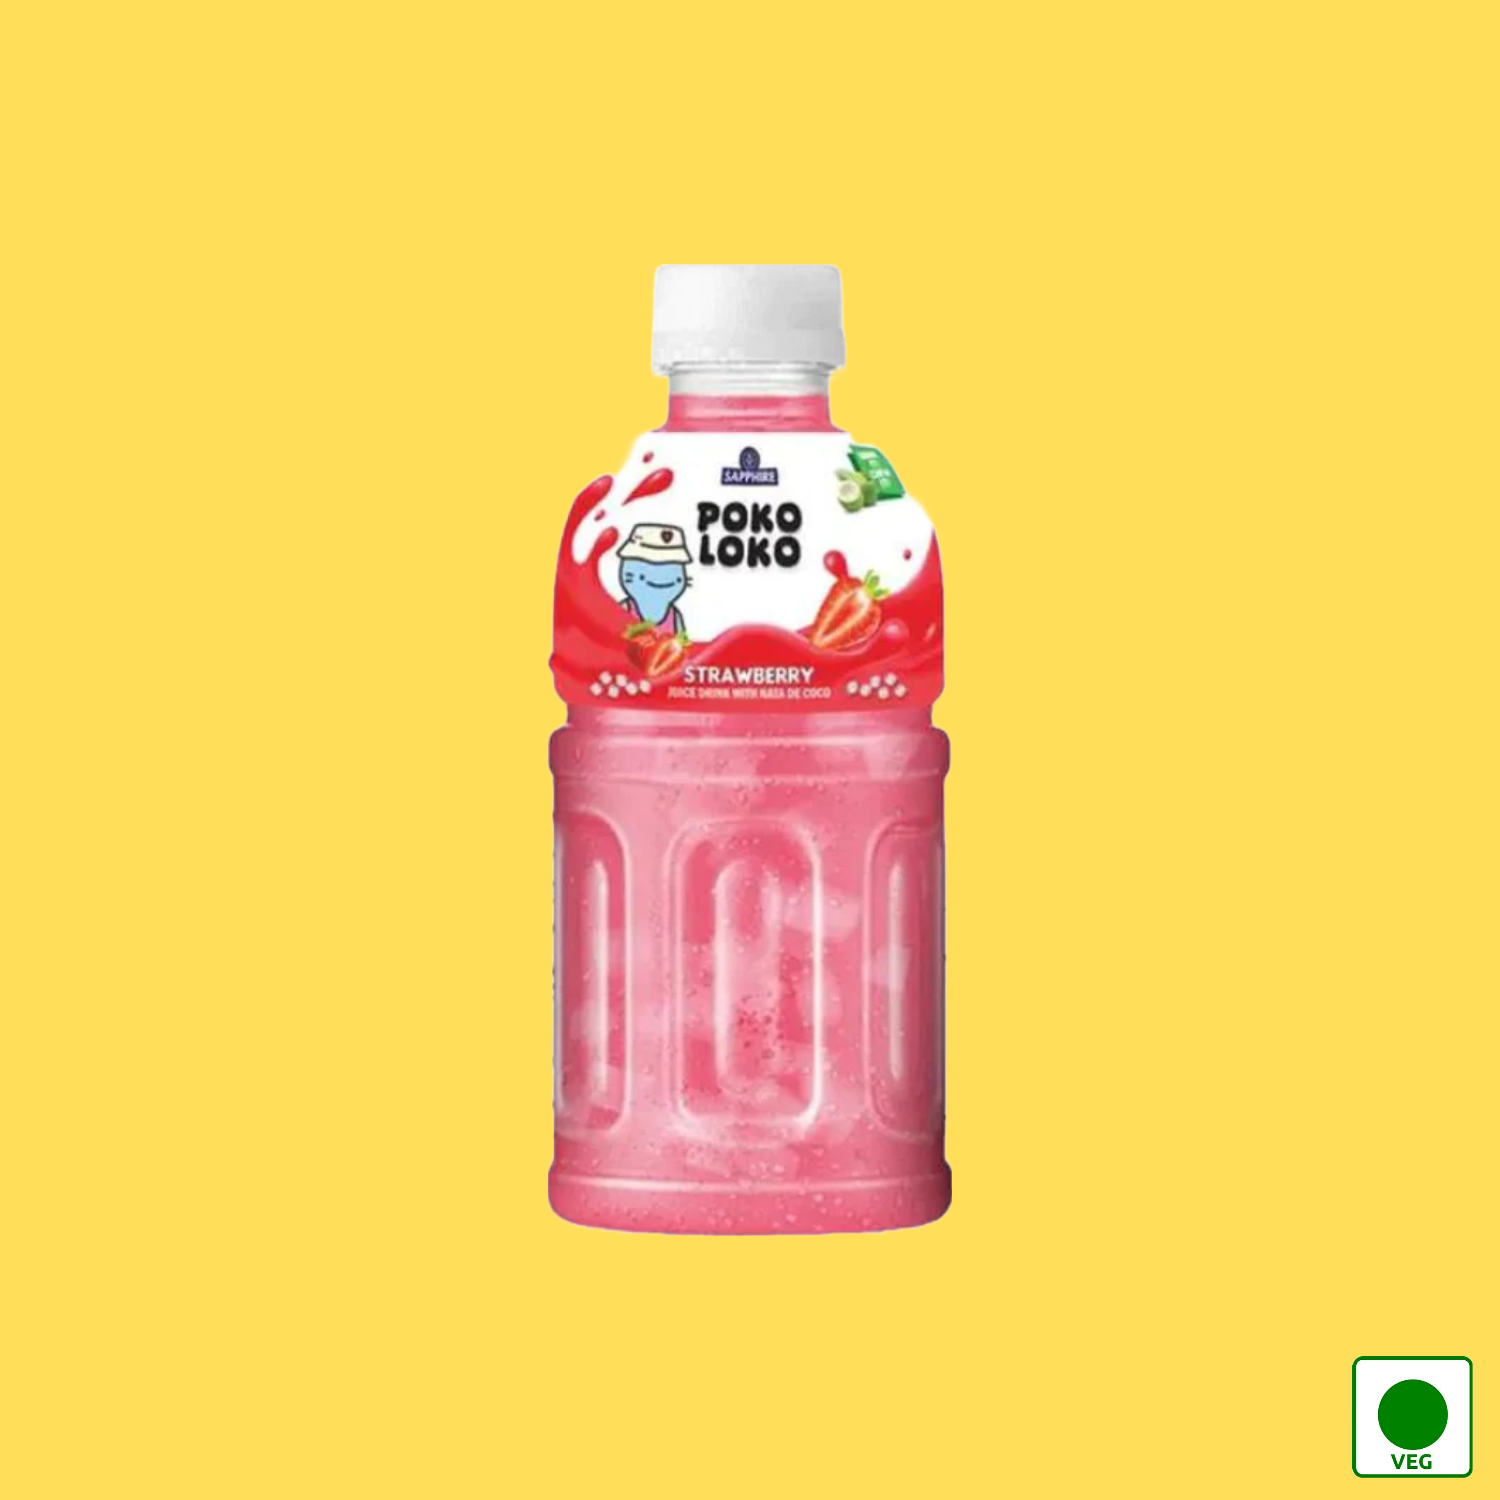 Sapphire Poko Loko Strawberry Flavoured Juice Drink With Nata De Coco, 300ml (Imported)